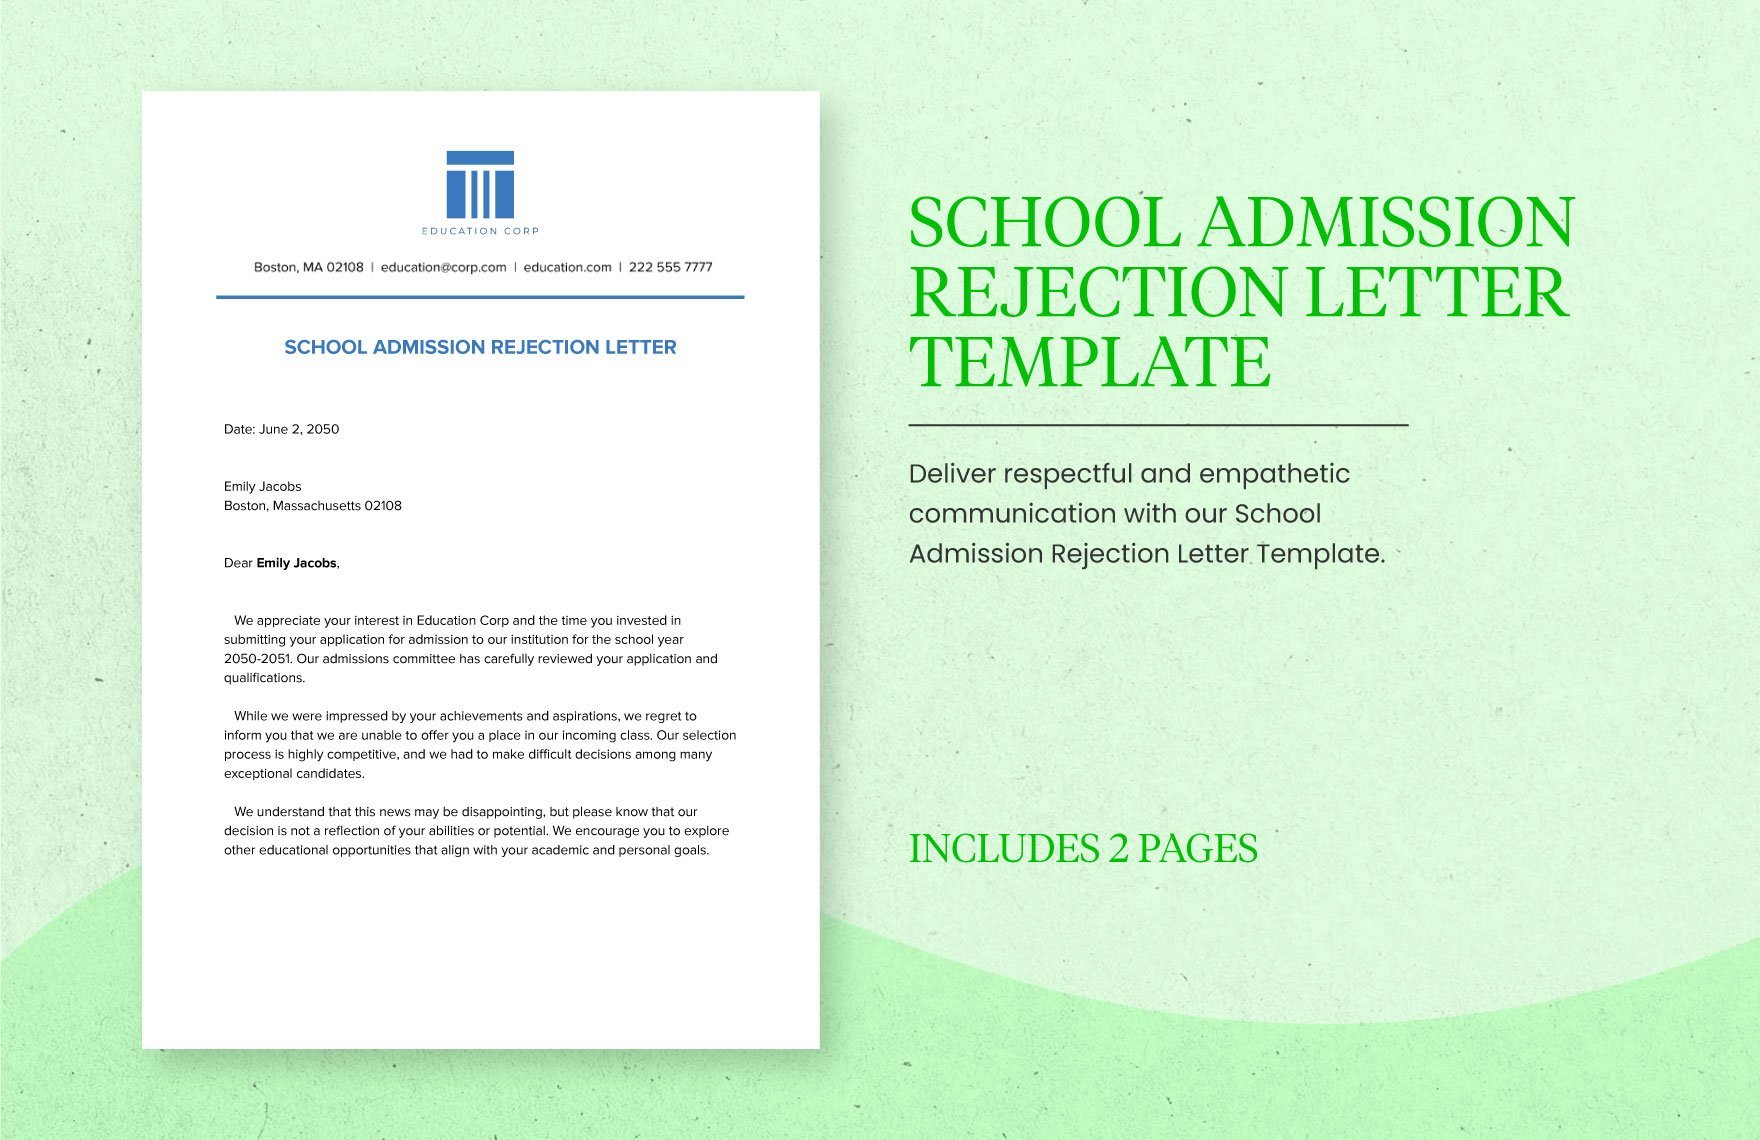 School Admission Rejection Letter Template